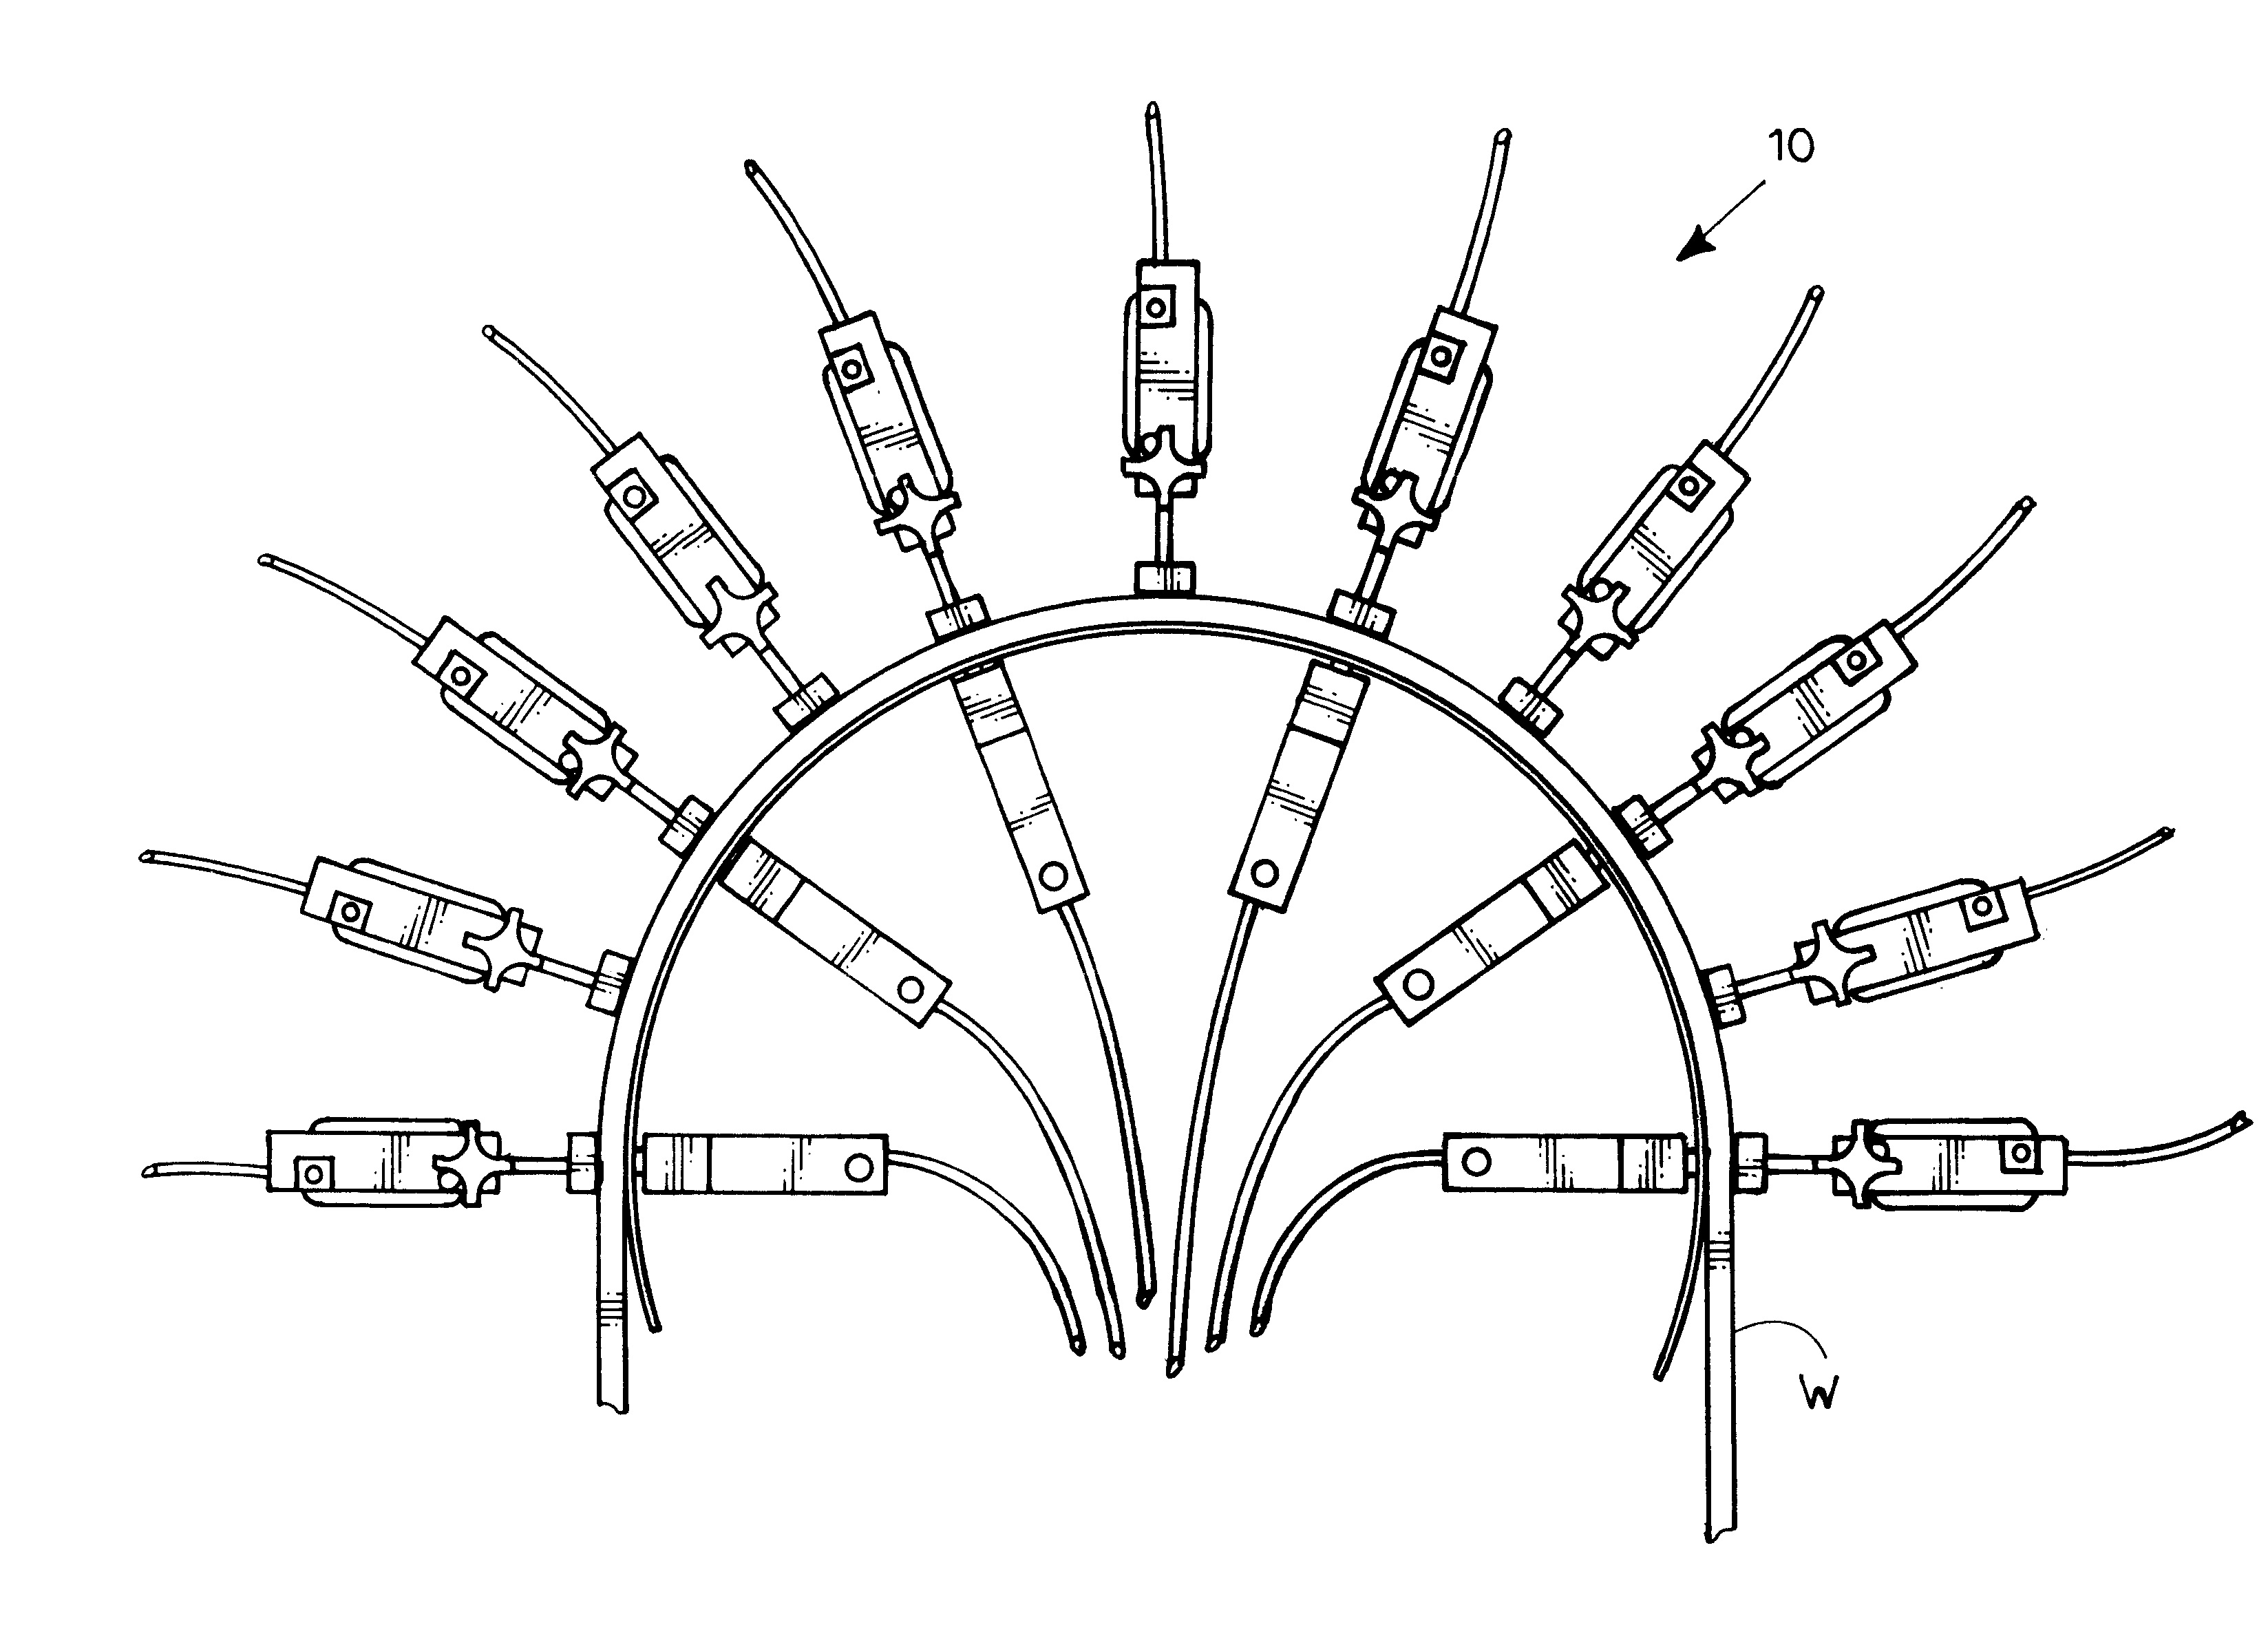 Unit and method for bending wood